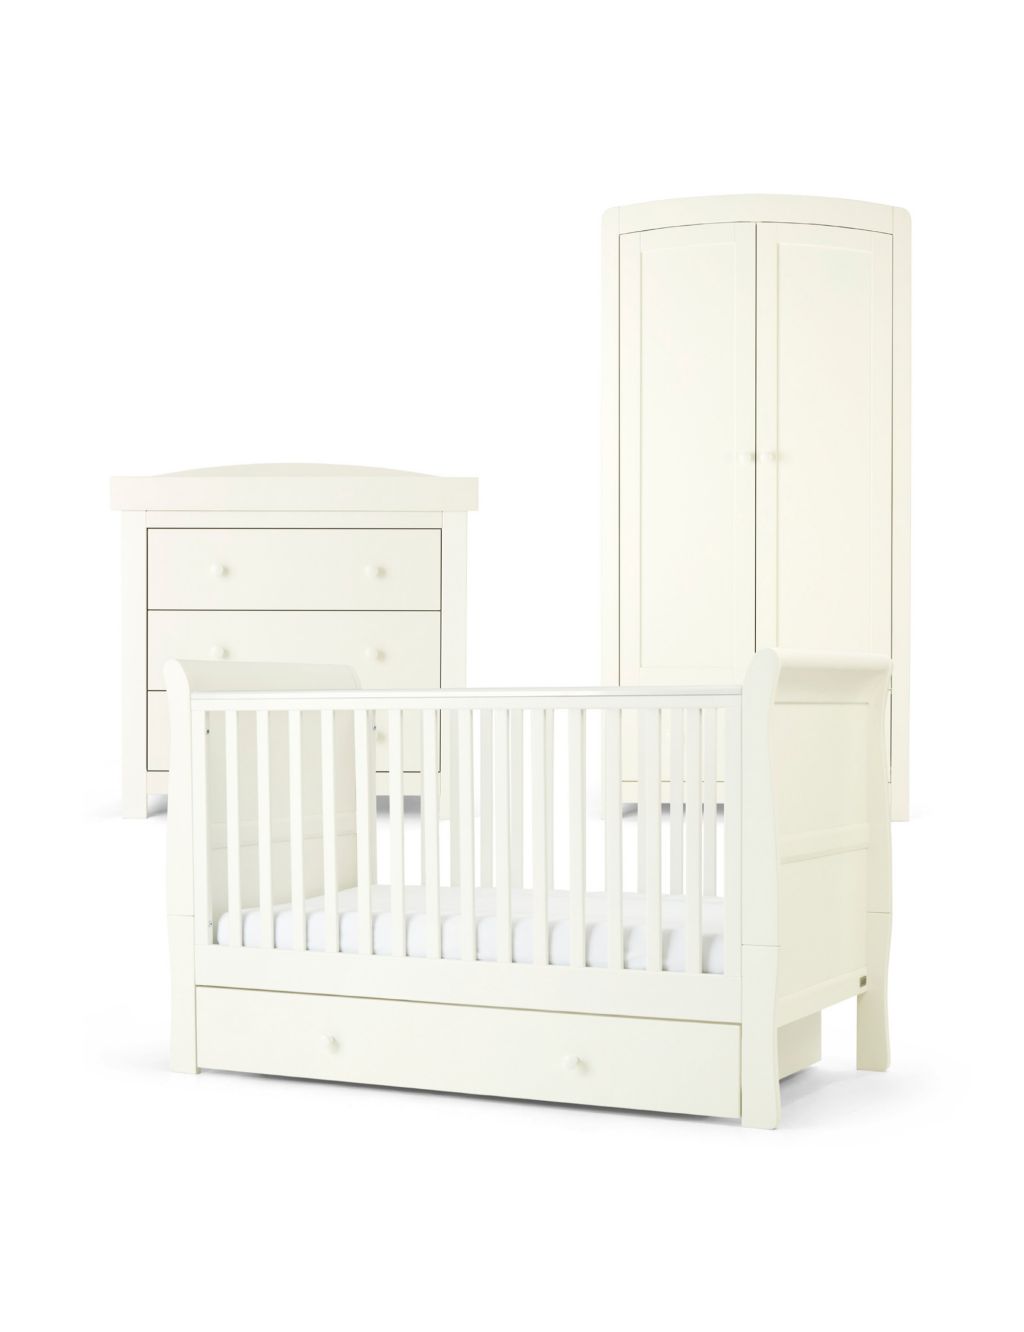 Mia 3 Piece Cotbed Range with Dresser and Wardrobe image 1